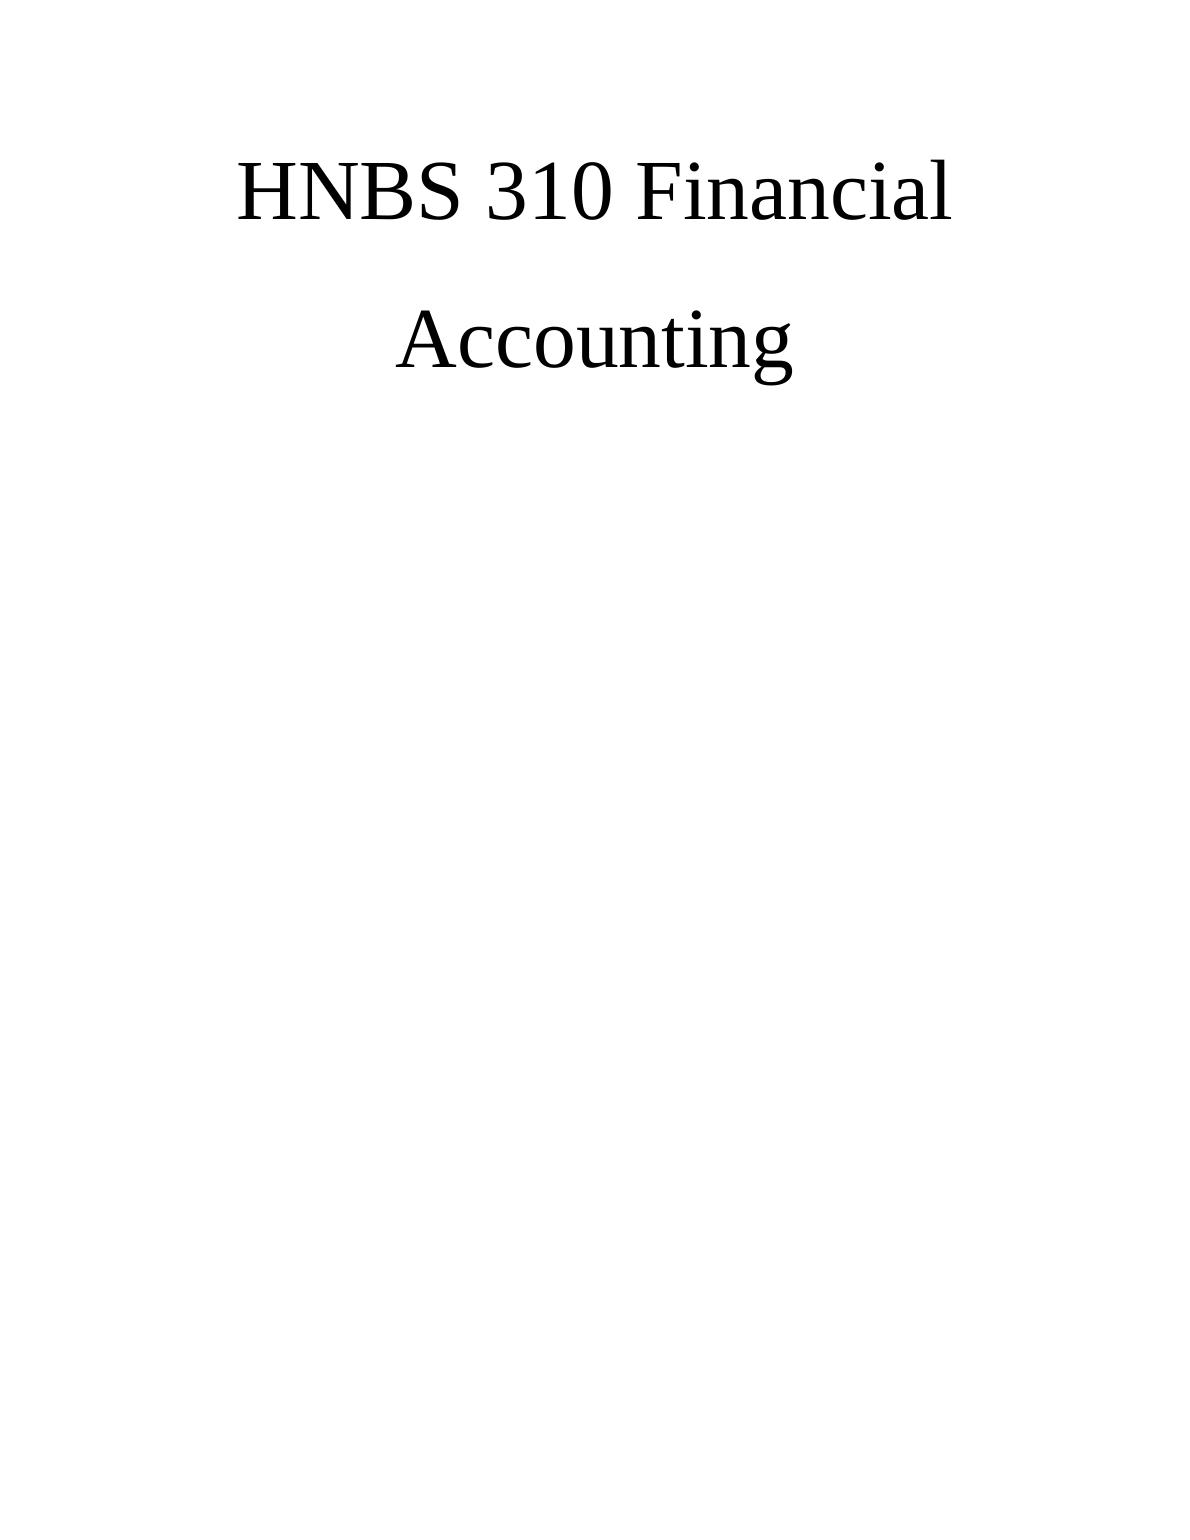 HNBS 310 - Financial Accounting Assignment_1